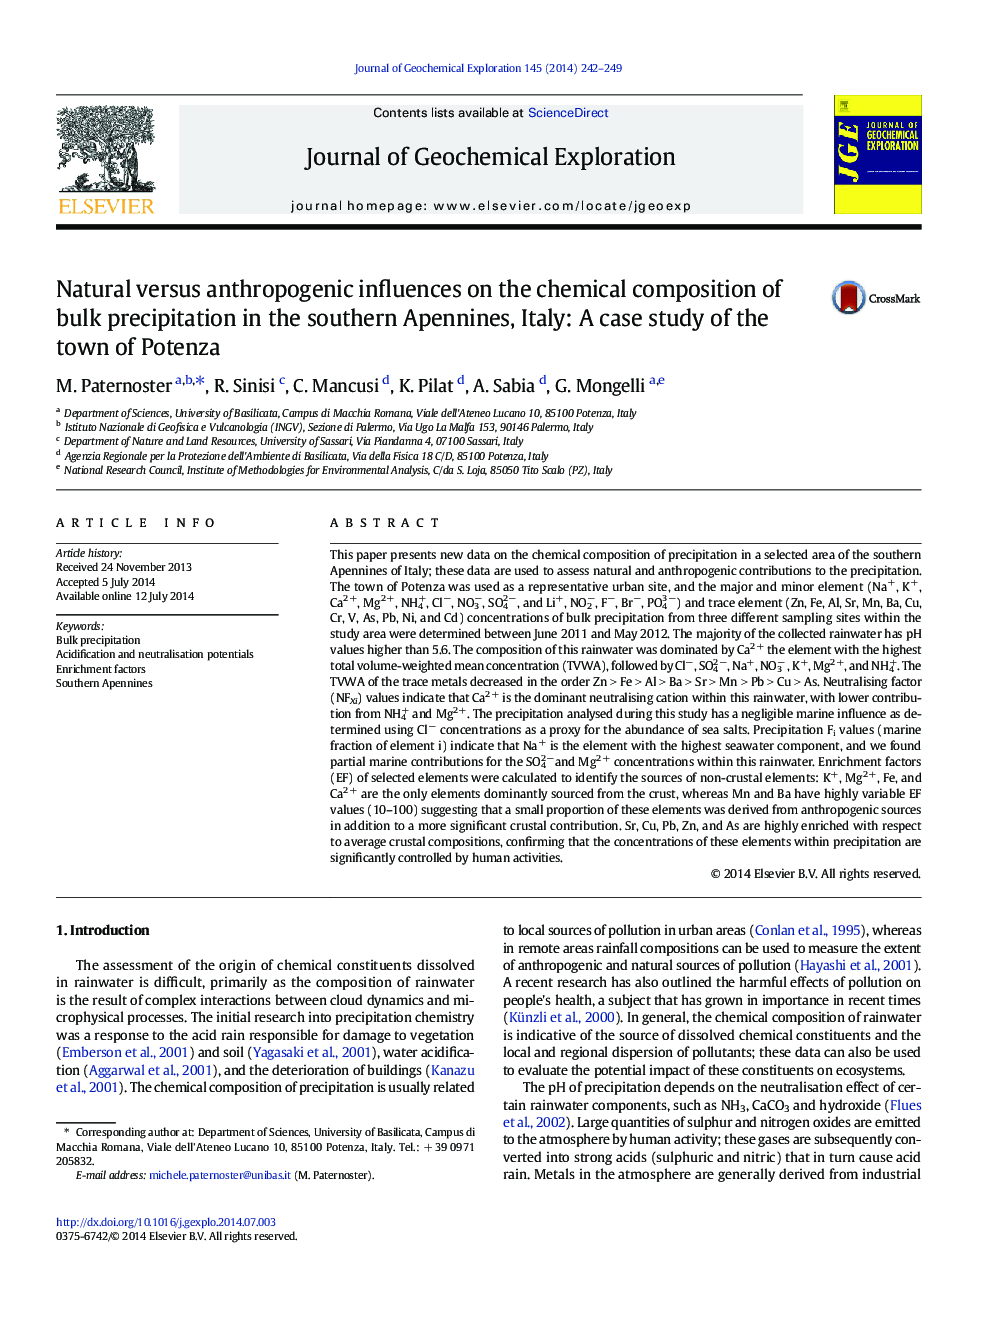 Natural versus anthropogenic influences on the chemical composition of bulk precipitation in the southern Apennines, Italy: A case study of the town of Potenza